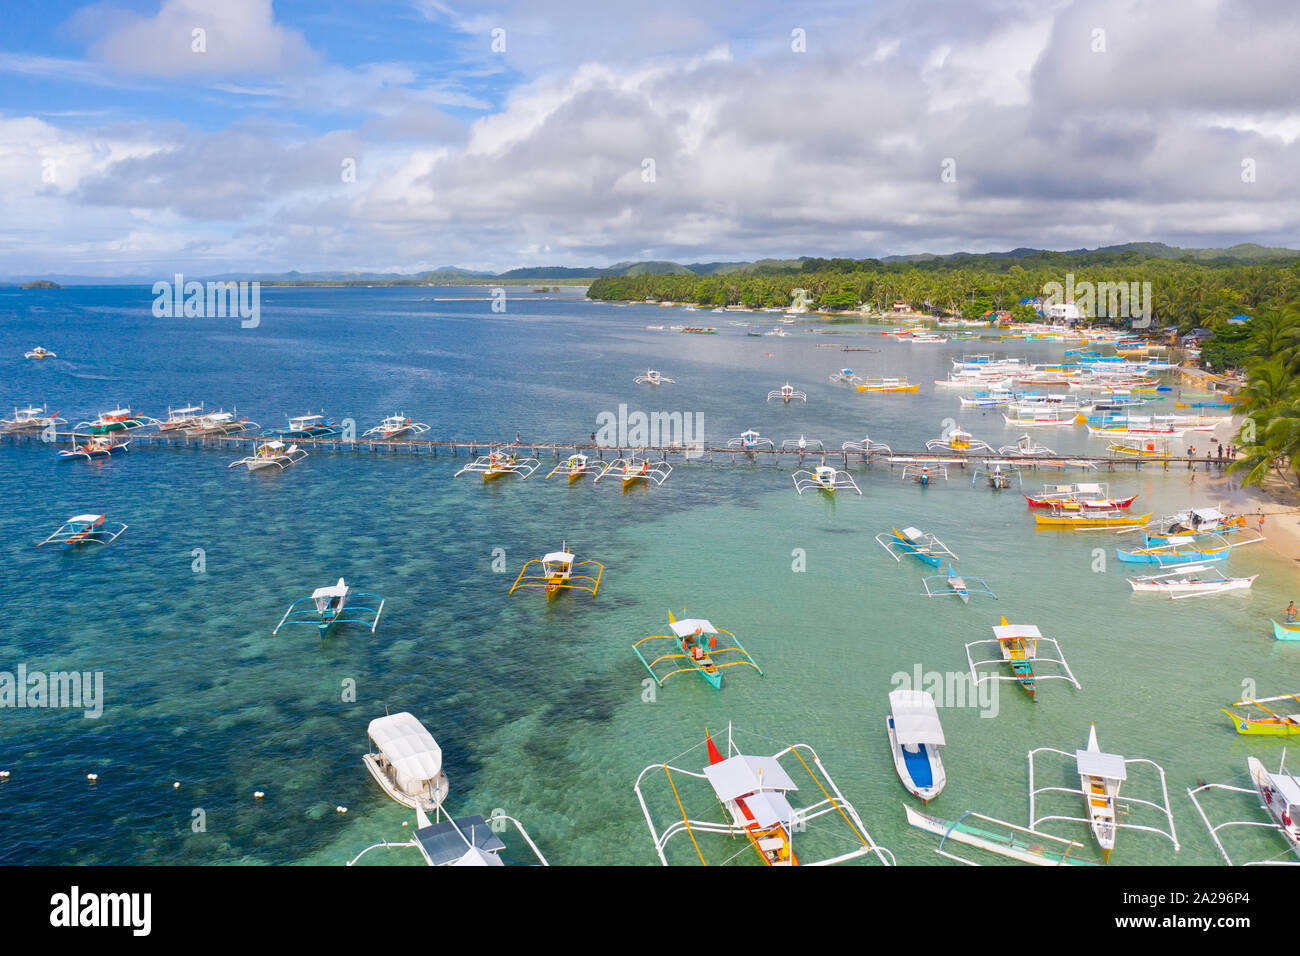 City General Luna on the coast of Siargao with a pier, a port and tourist boats. Marina with boats. Sea landscape with boats. Stock Photo